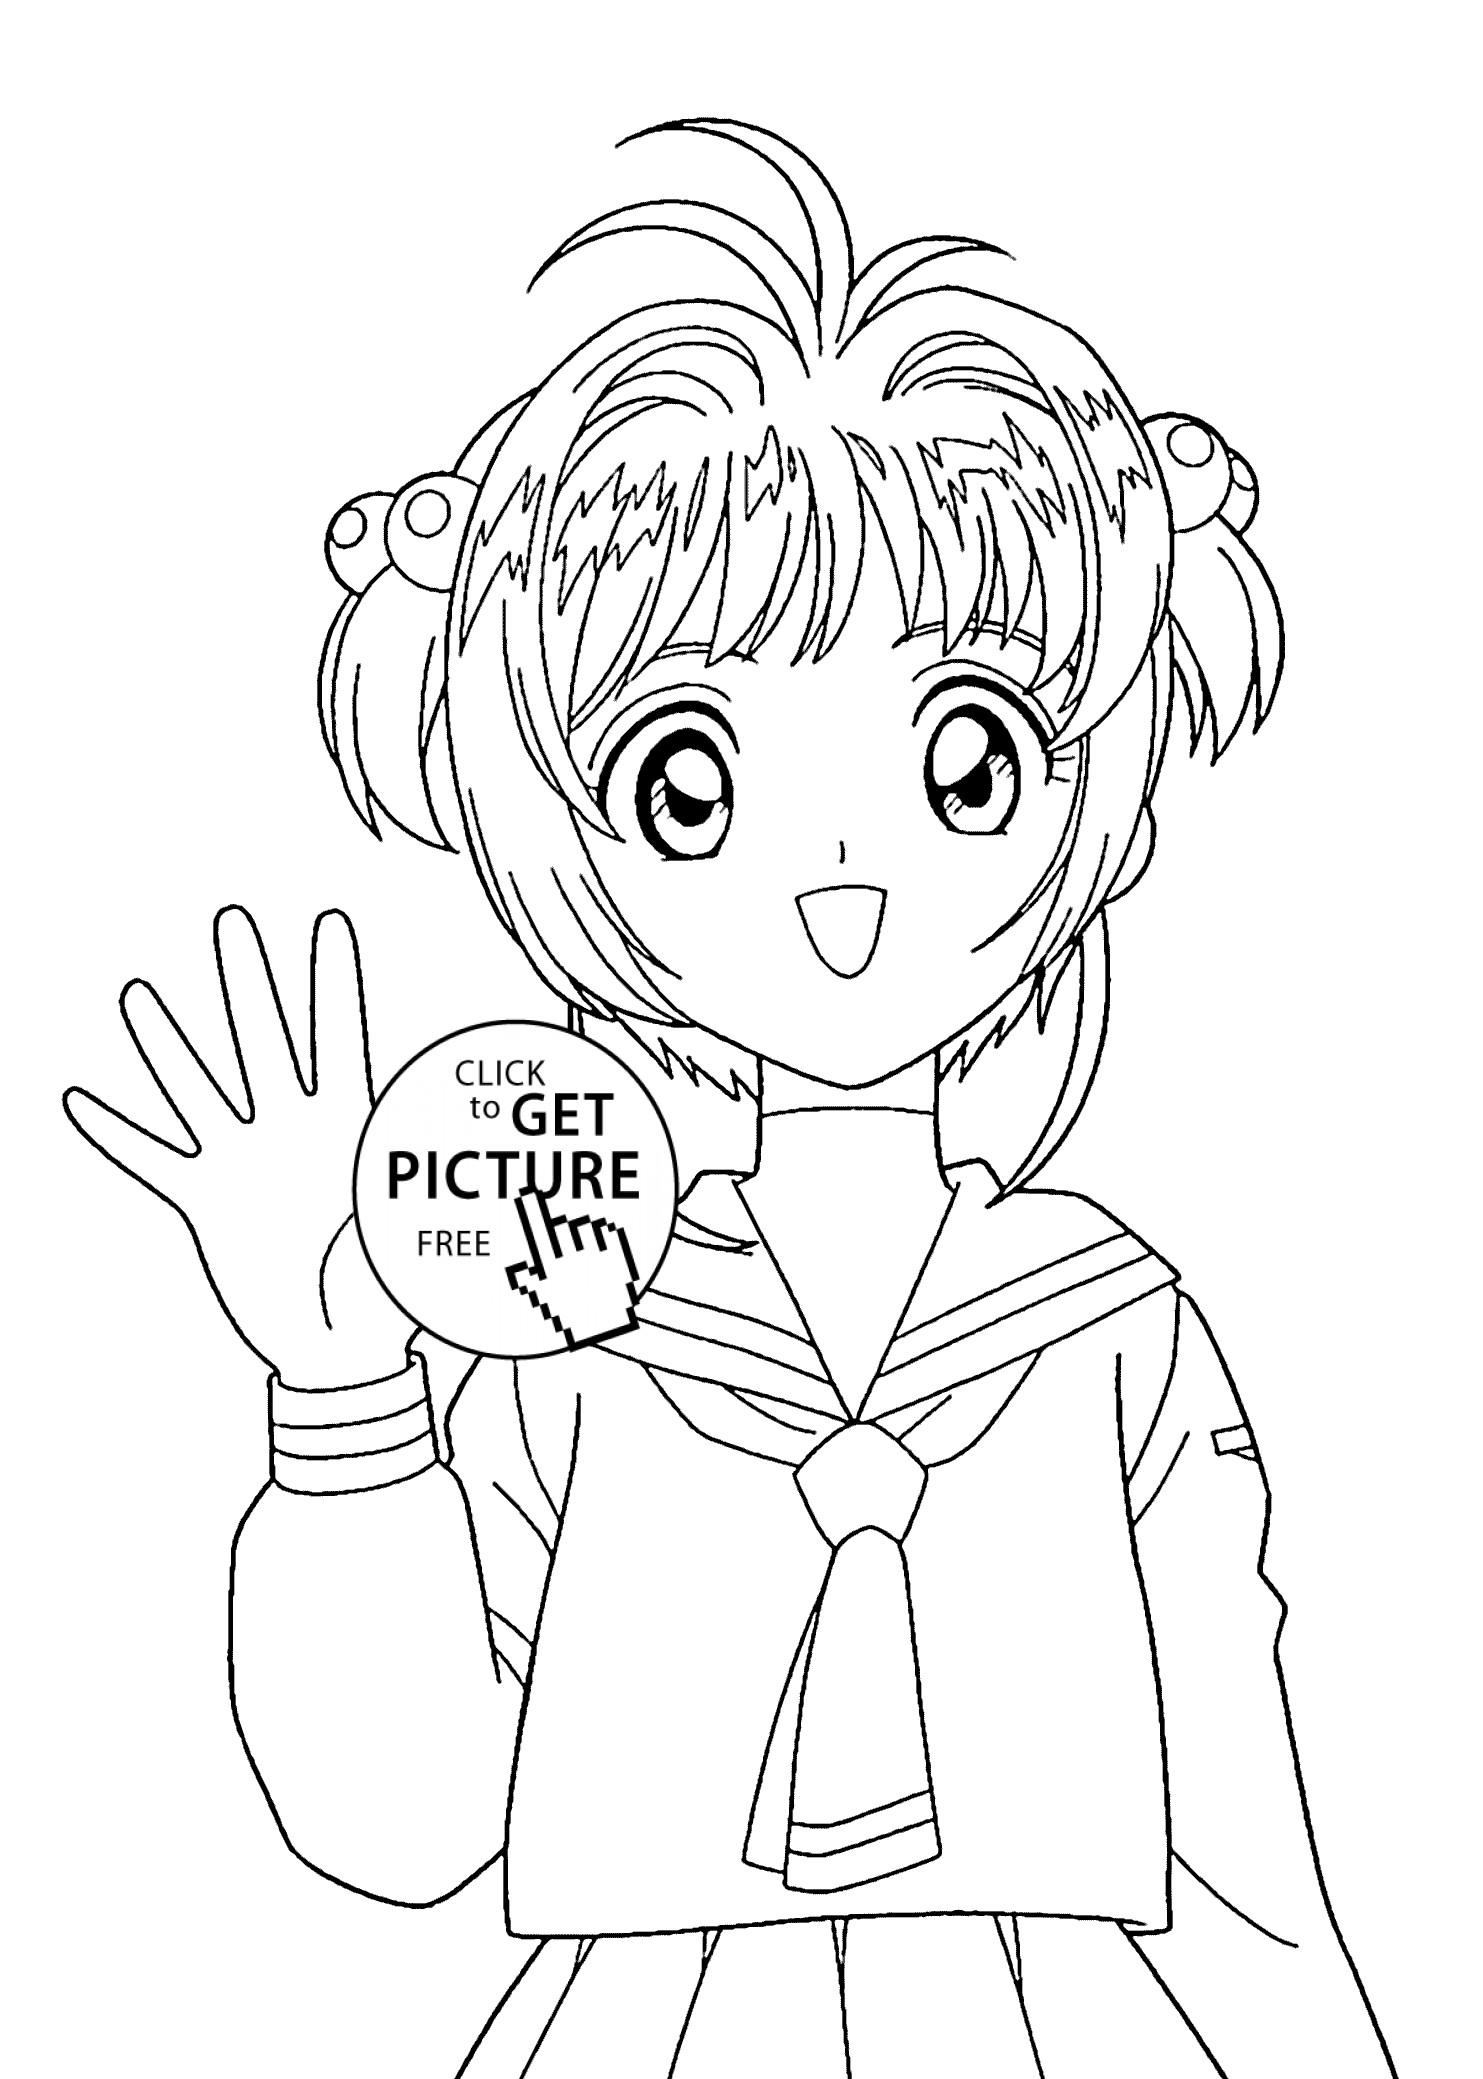 Animated Girl Coloring Pages
 Sakura coloring pages for kids printable free